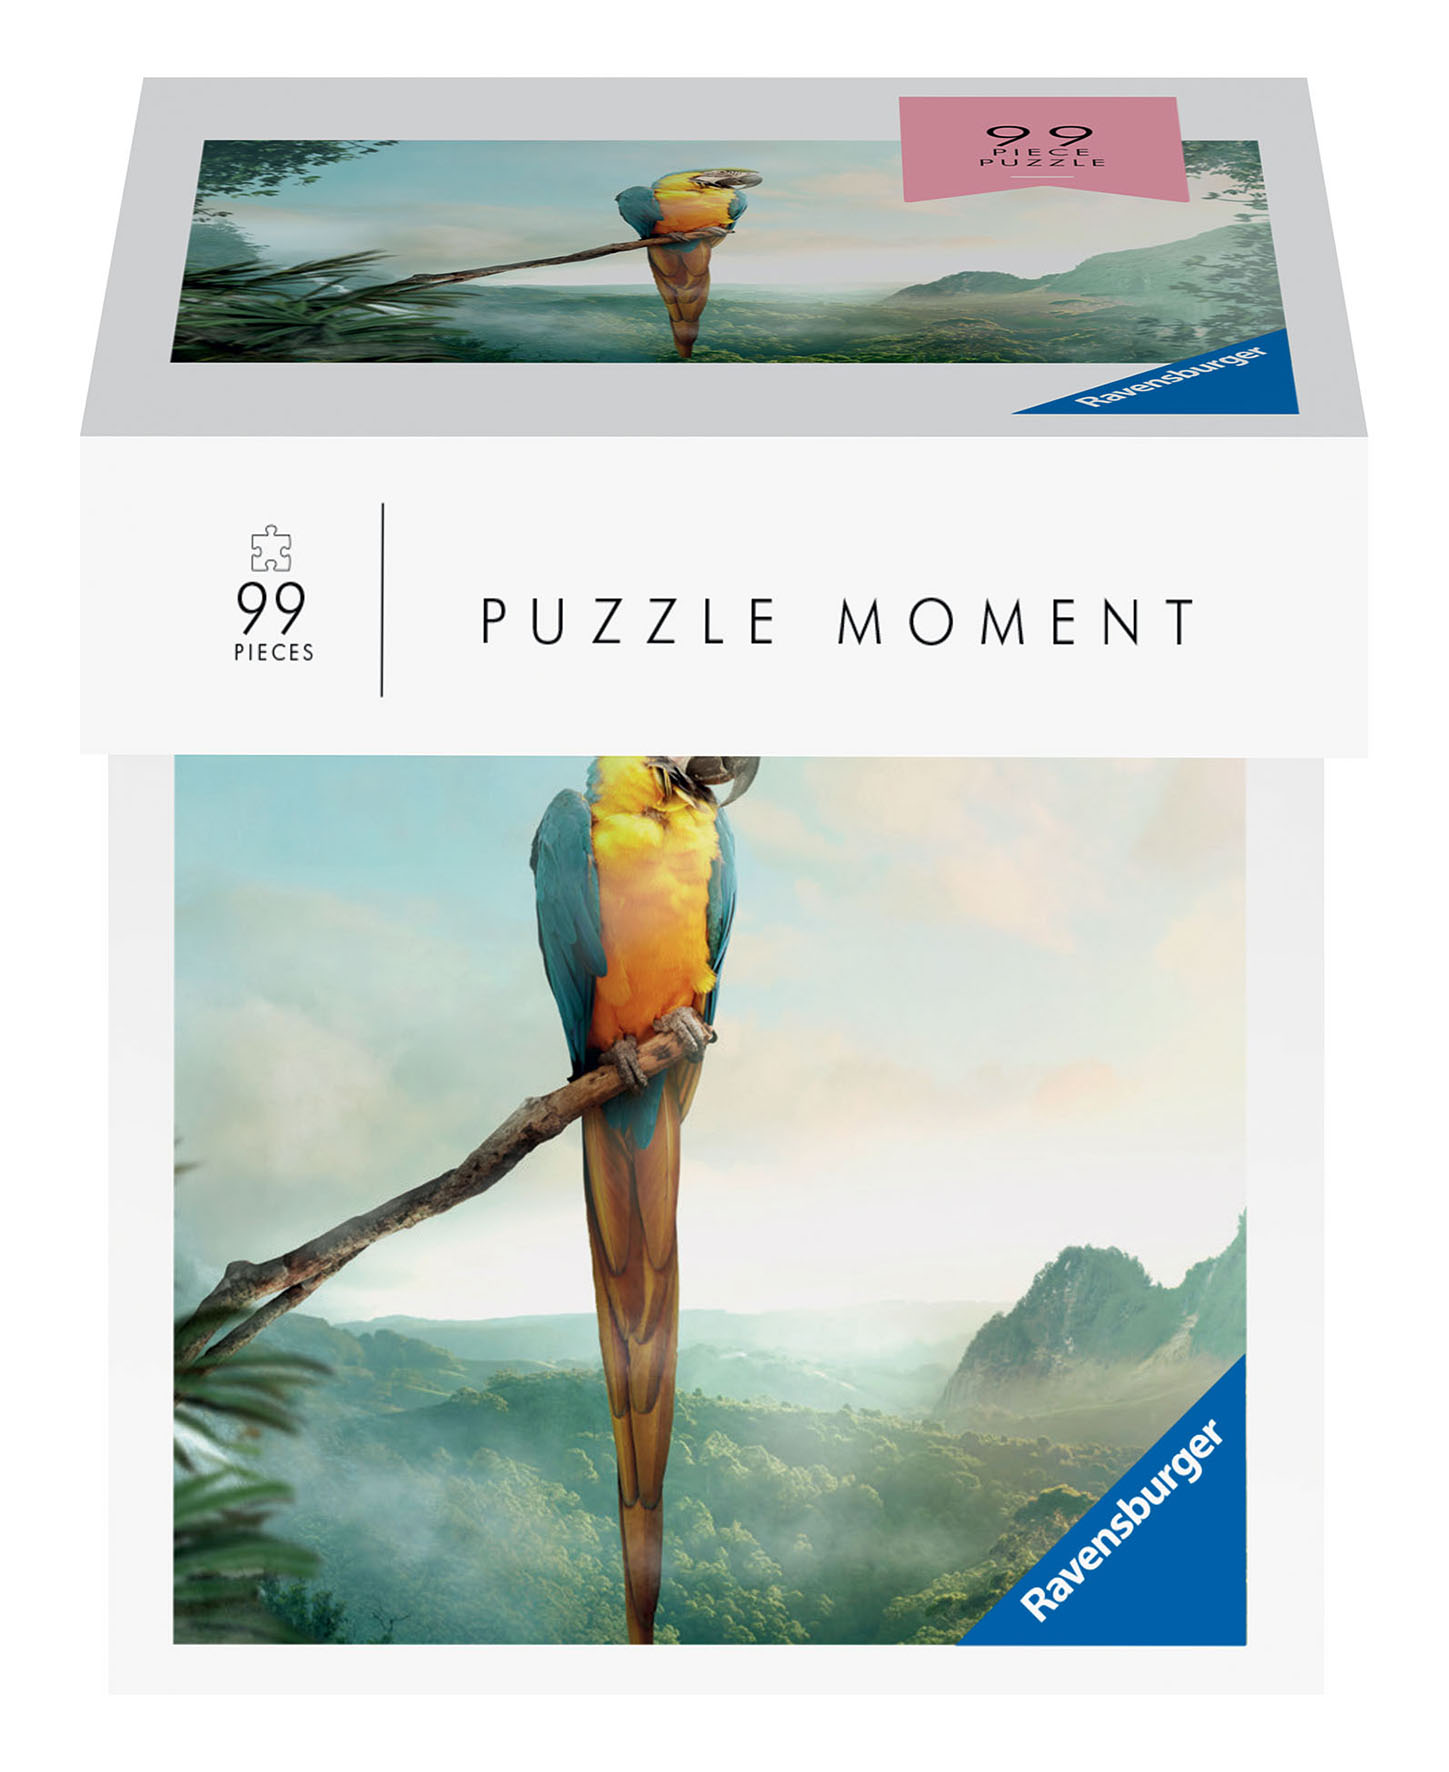 PUZZLE MOMENT DISPLAY